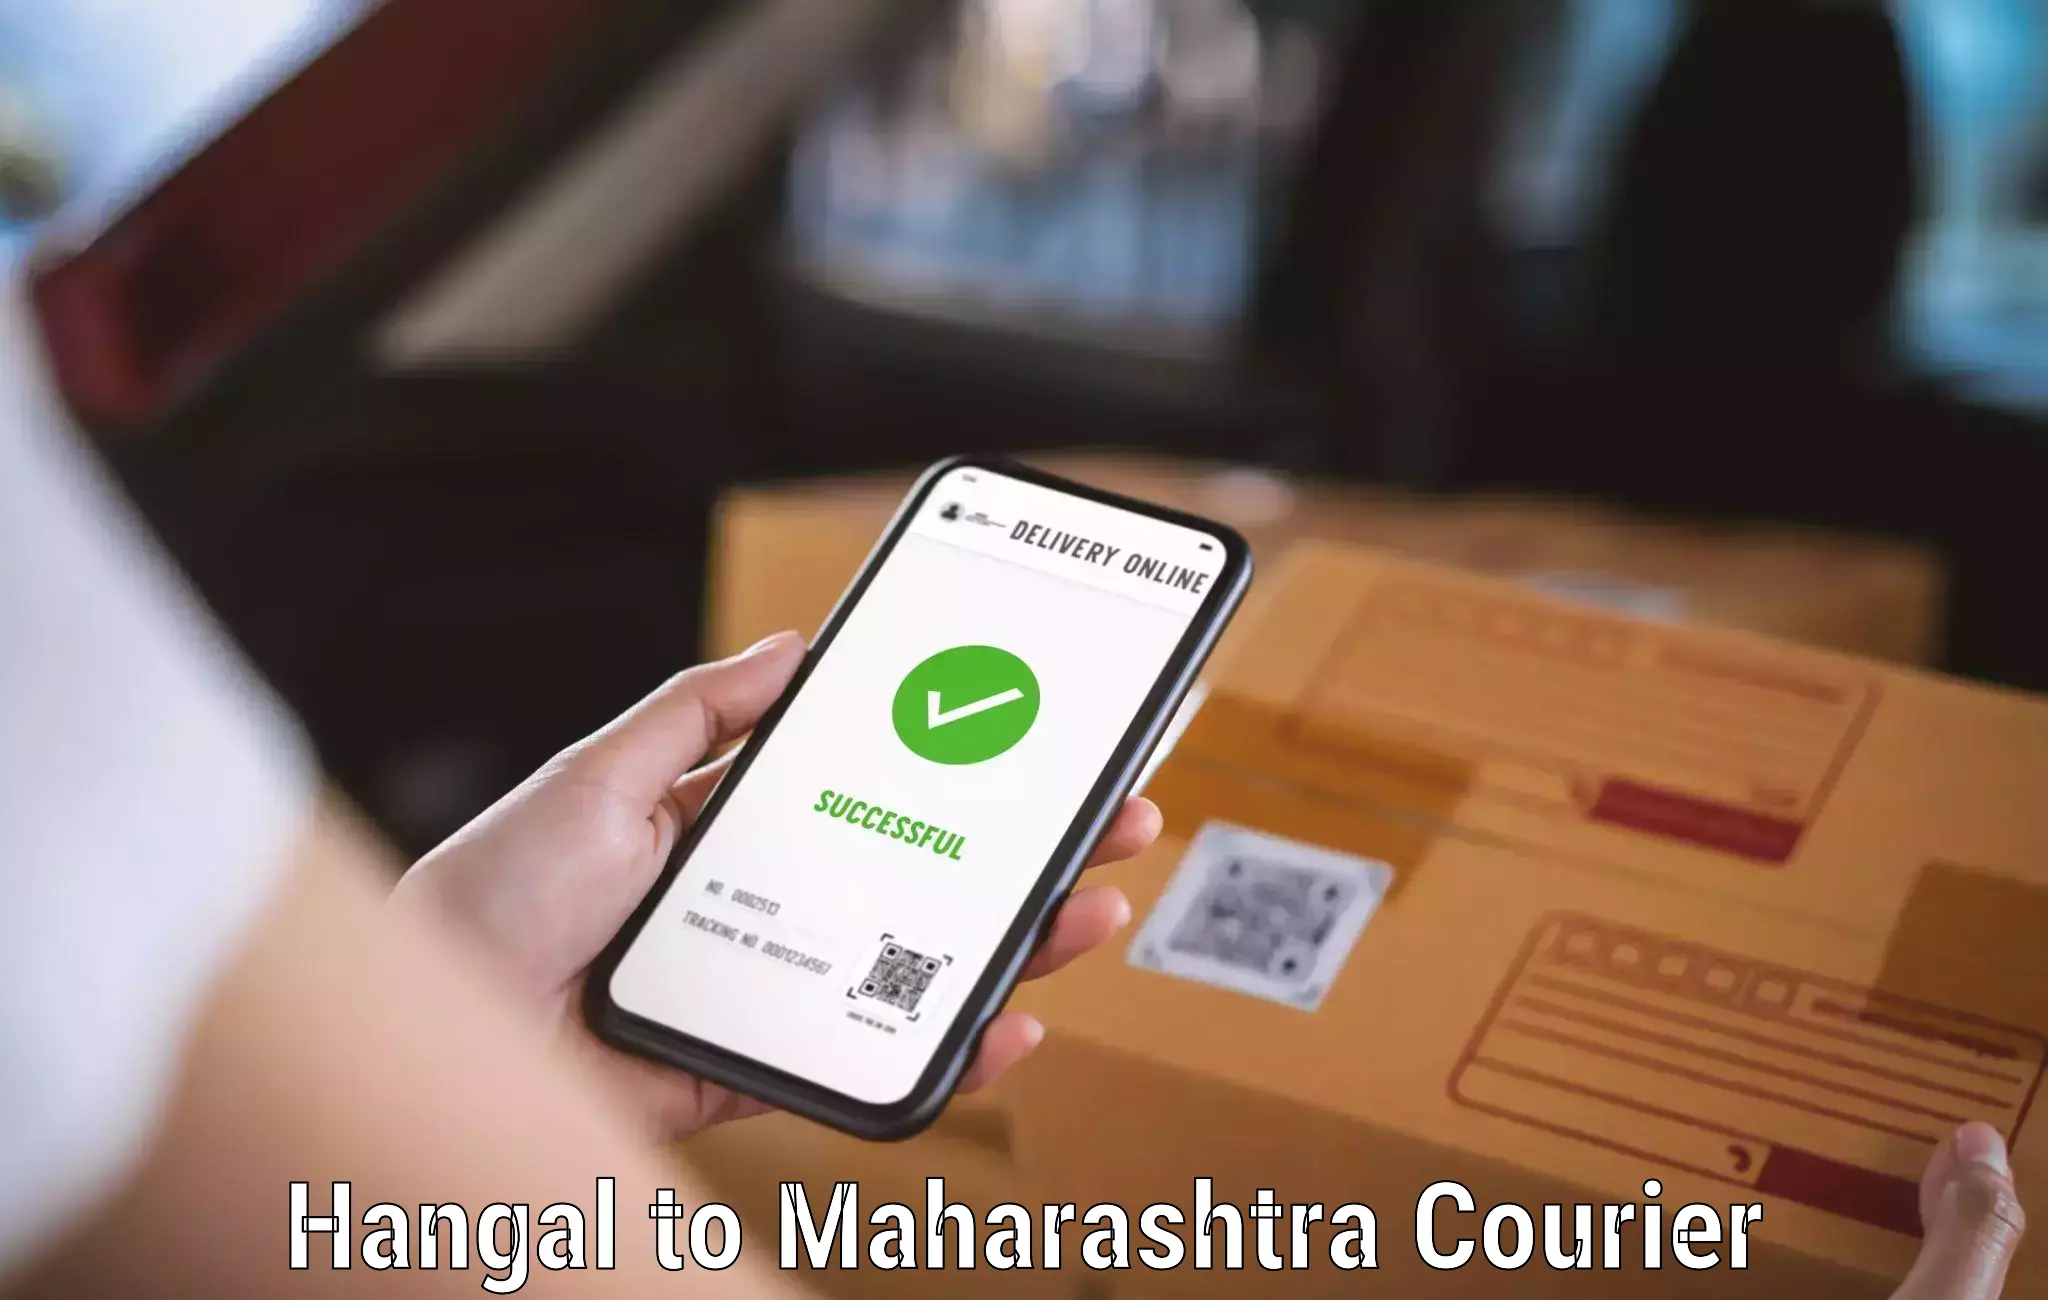 24/7 courier service Hangal to Andheri